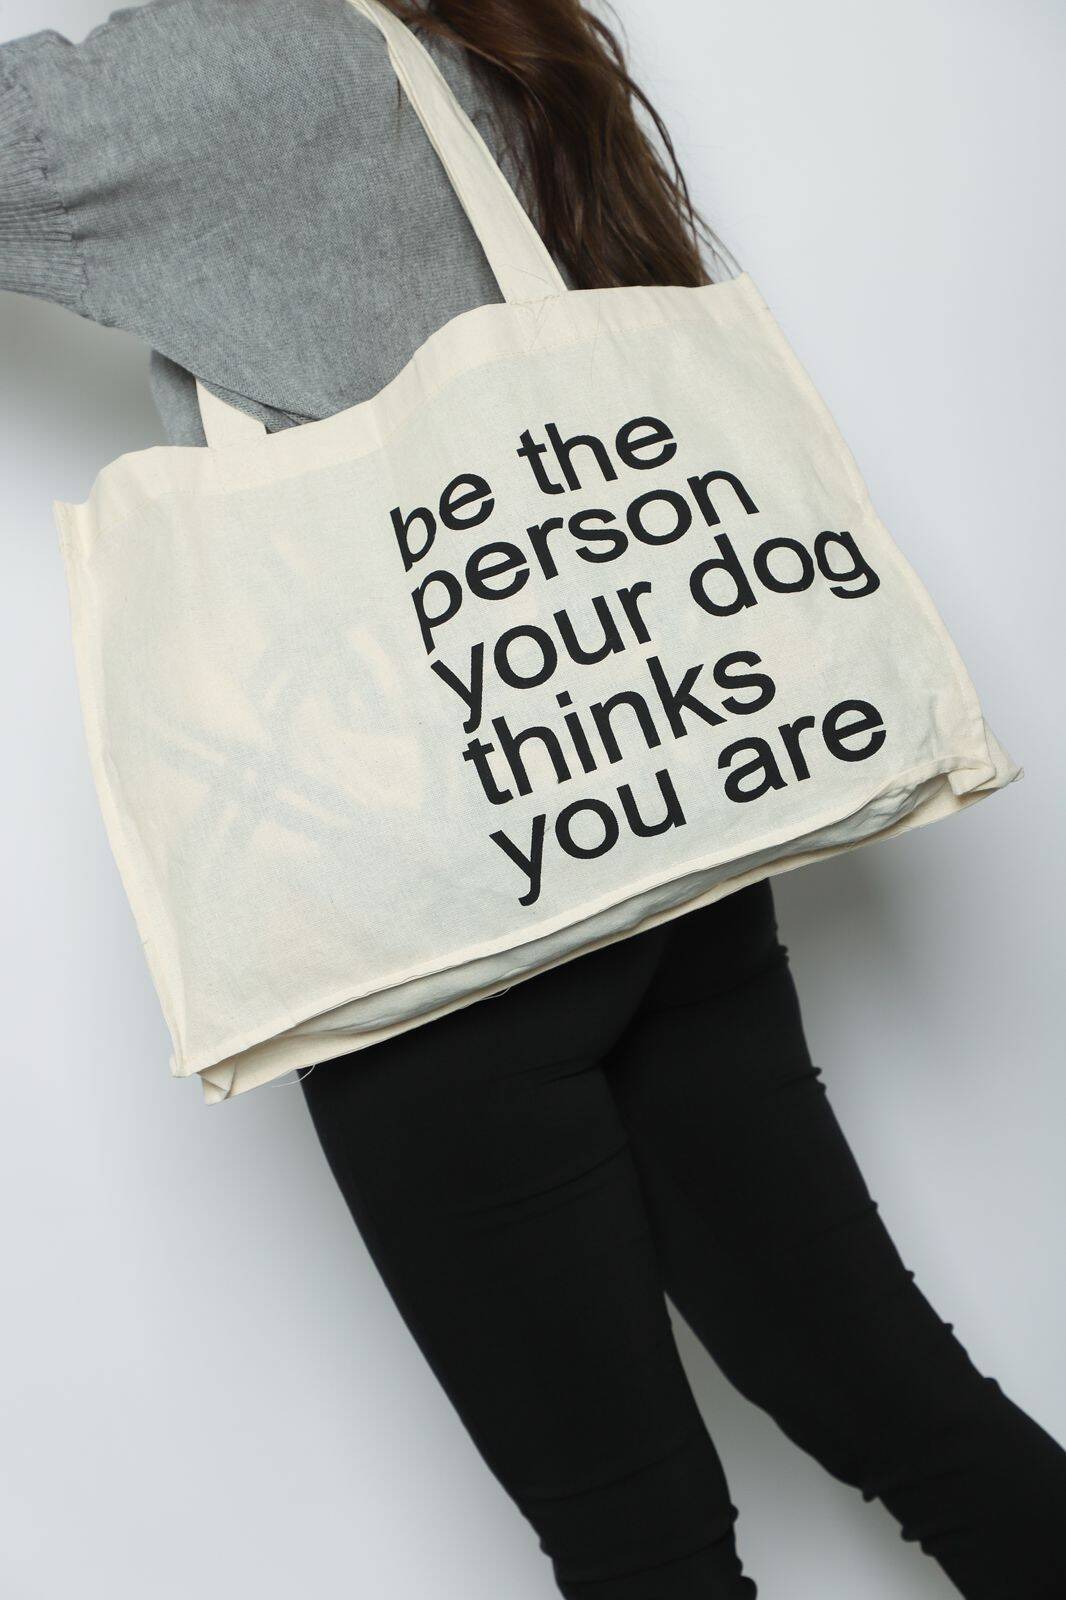 Imagen carrousel Bolso Be The Person 1